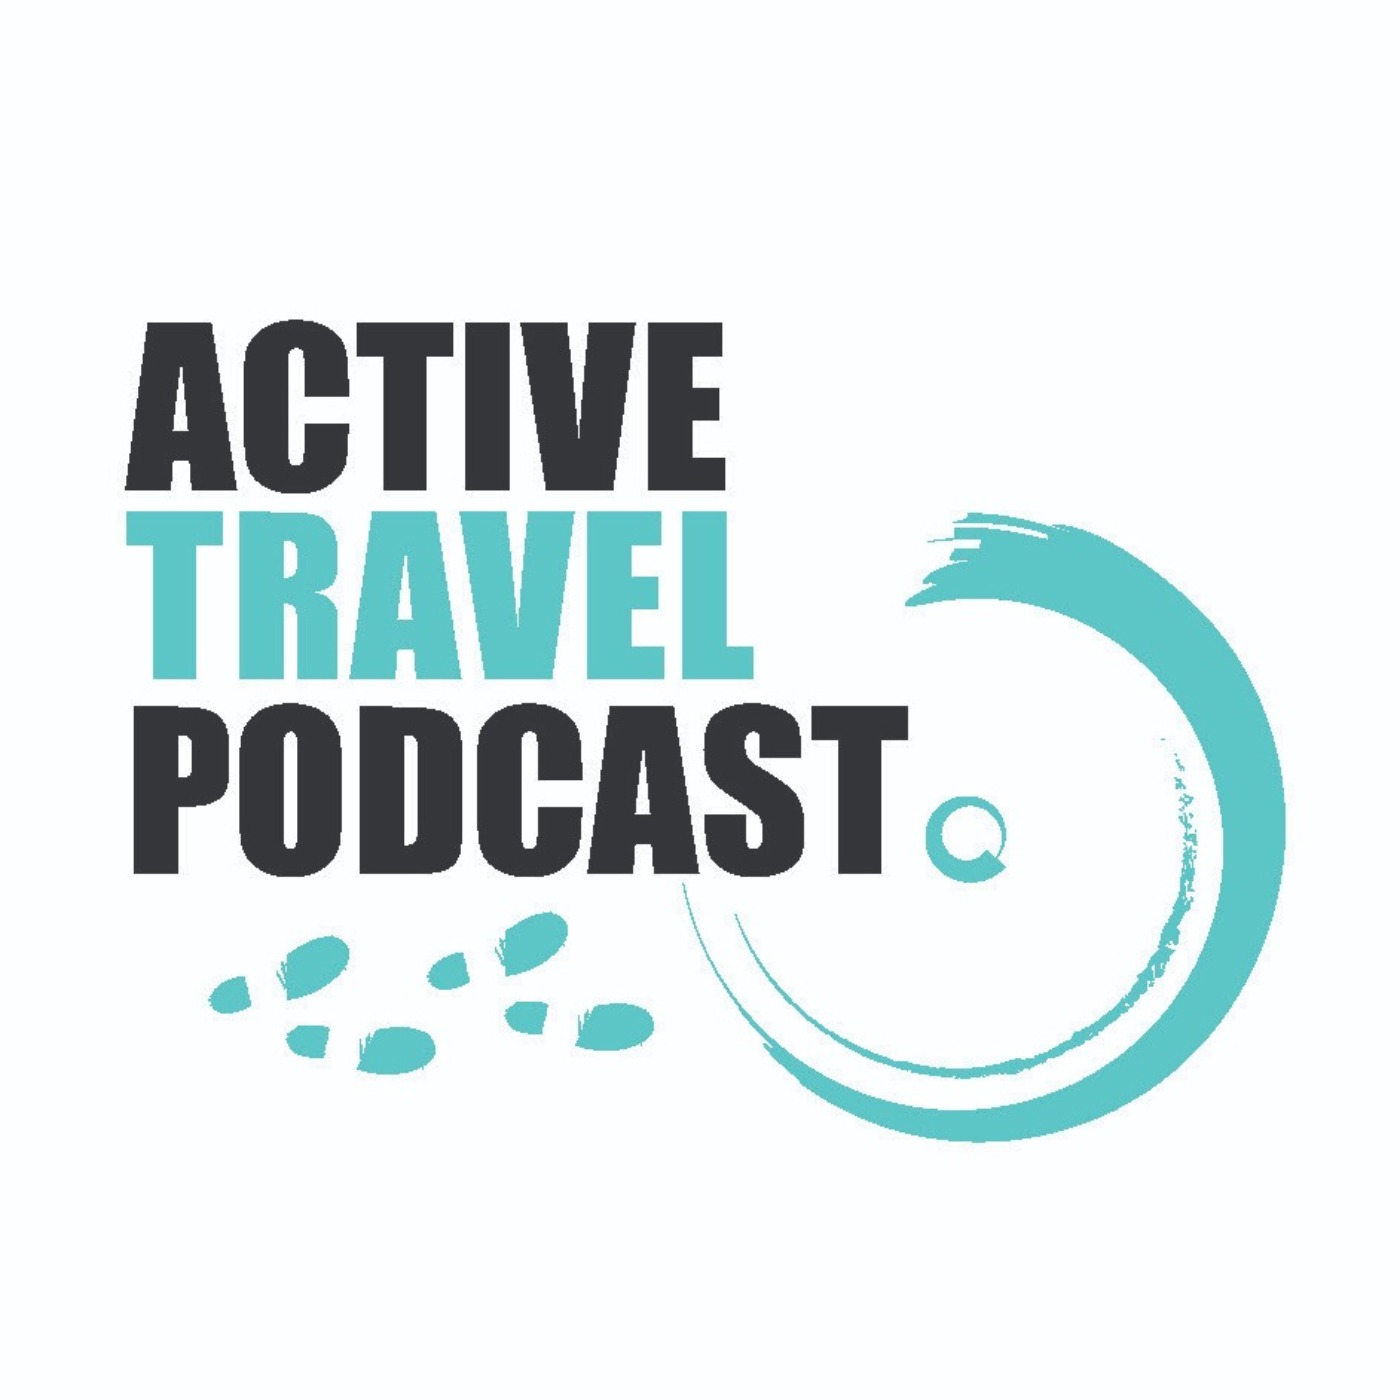 Active Travel Podcast Pilot: Media reporting of Active Travel